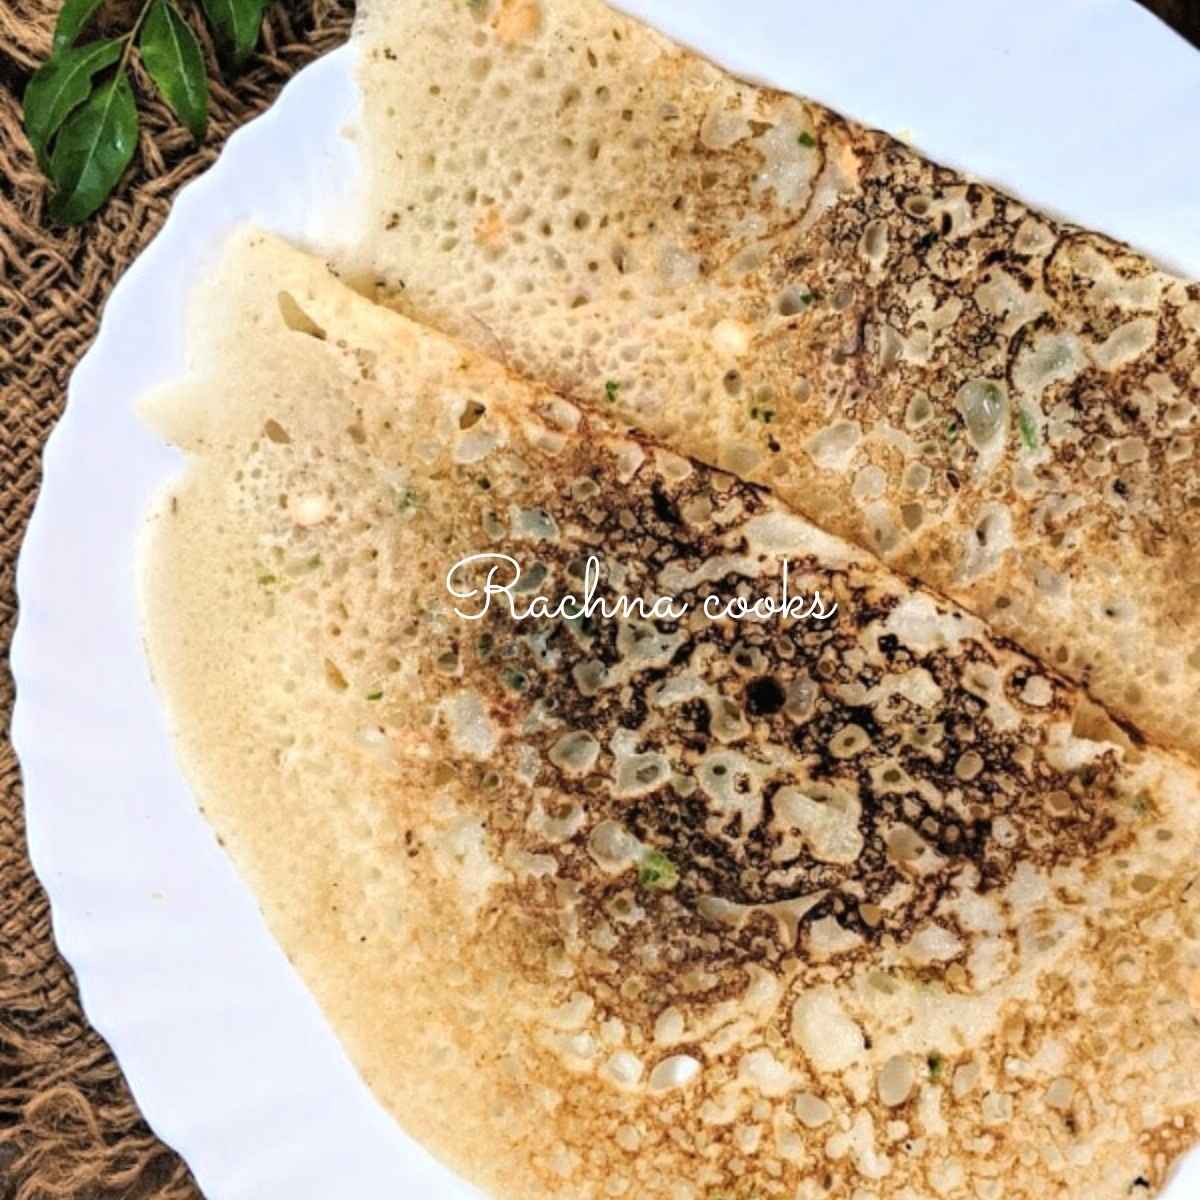 Top shot of two rava dosas on top of each other on a white plate.